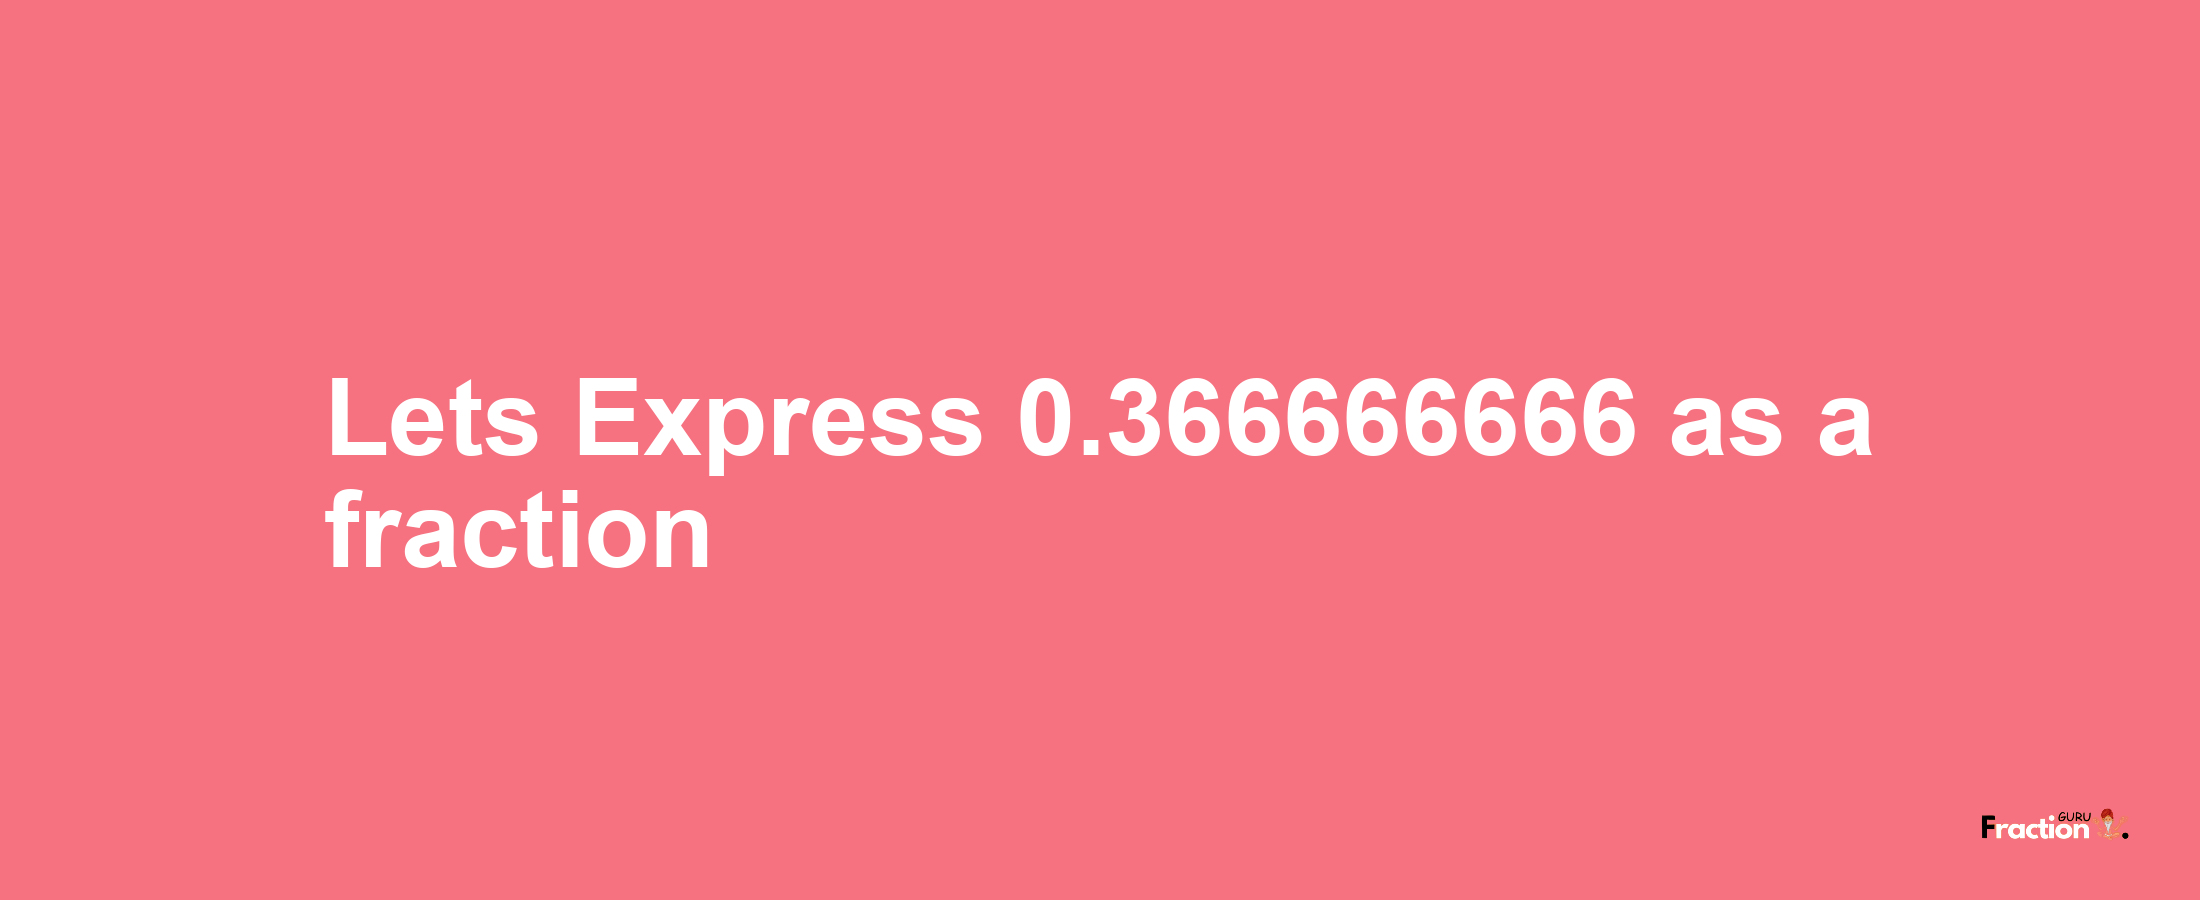 Lets Express 0.366666666 as afraction